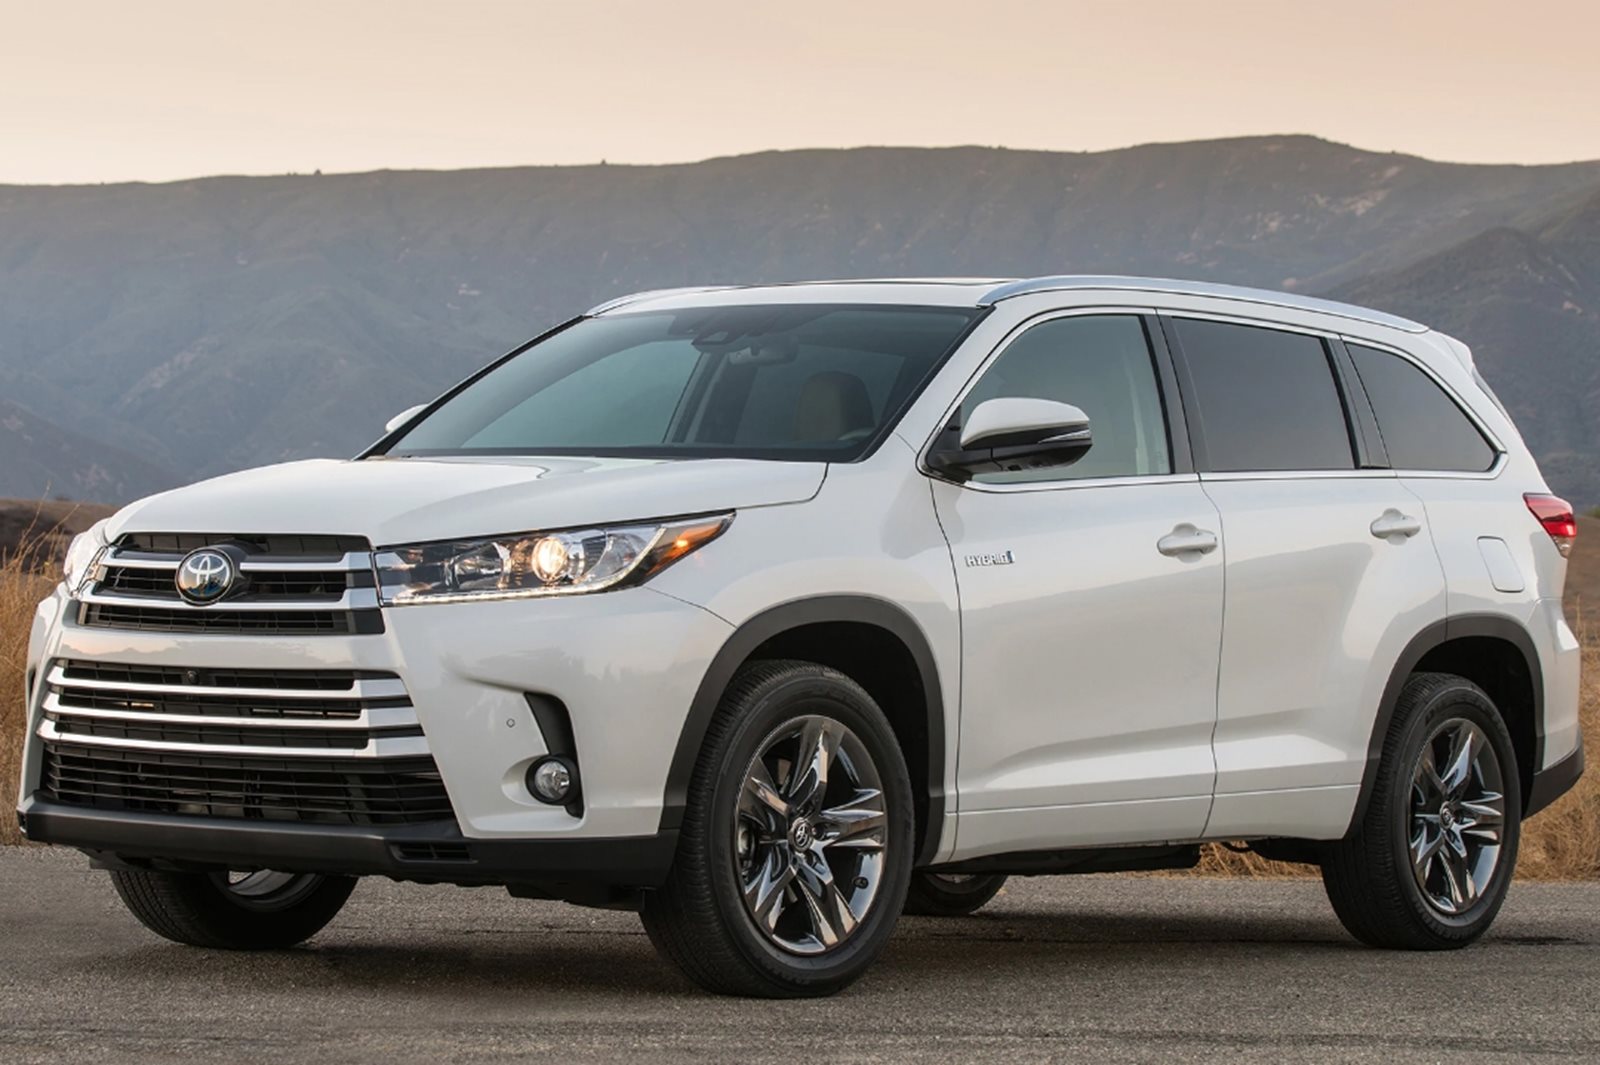 2018 Toyota Highlander Hybrid Review, Trims, Specs and Price | CarBuzz